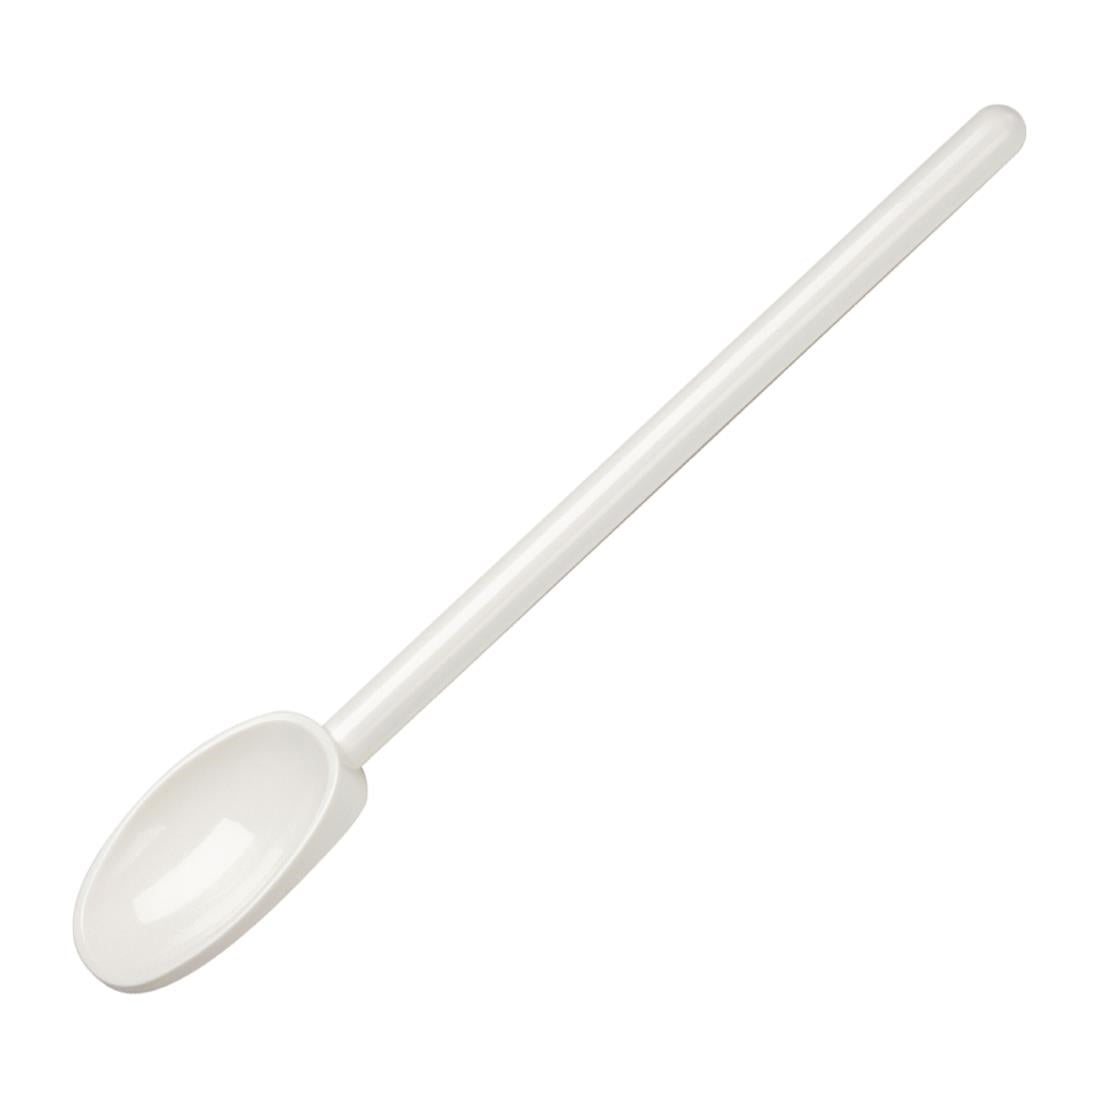 Mercer Culinary Hells Tools Mixing Spoon White 12"